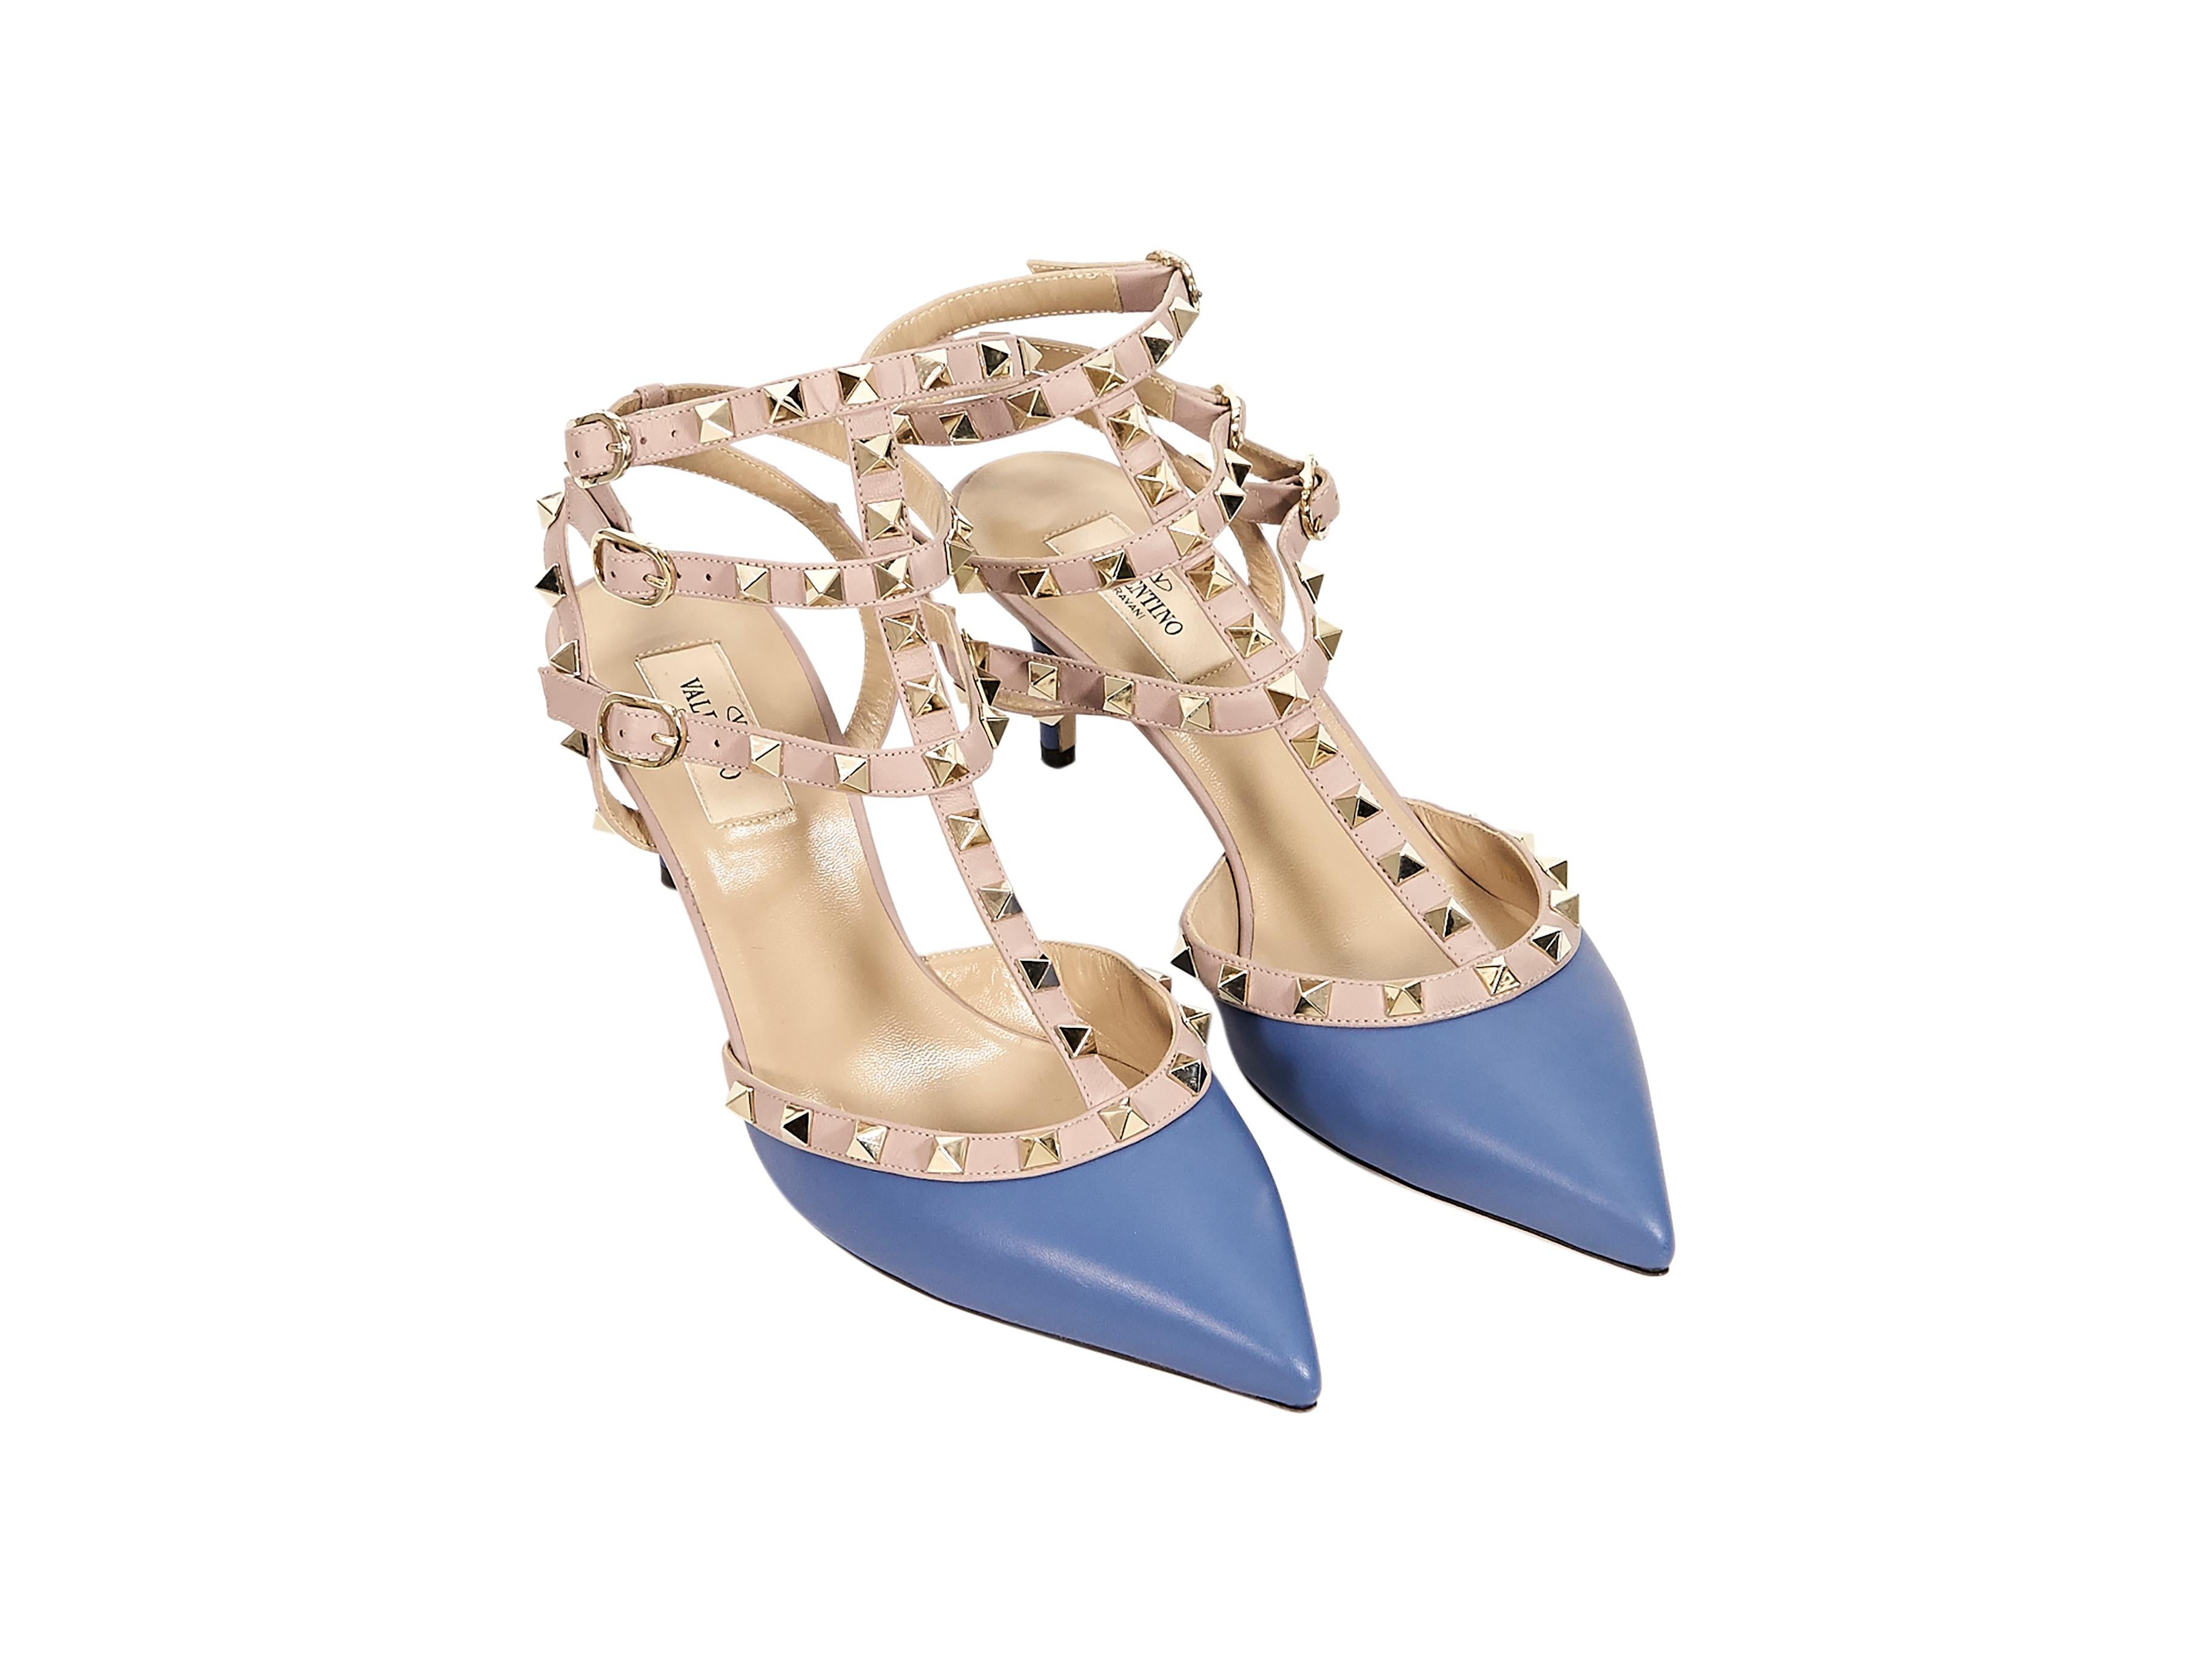 Product details:  Blue and nude leather Rockstud strappy kitten heels by Valentino.  Accented with pyramid studs.  Adjustable buckle straps.  Point toe.  Goldtone hardware.  2.5